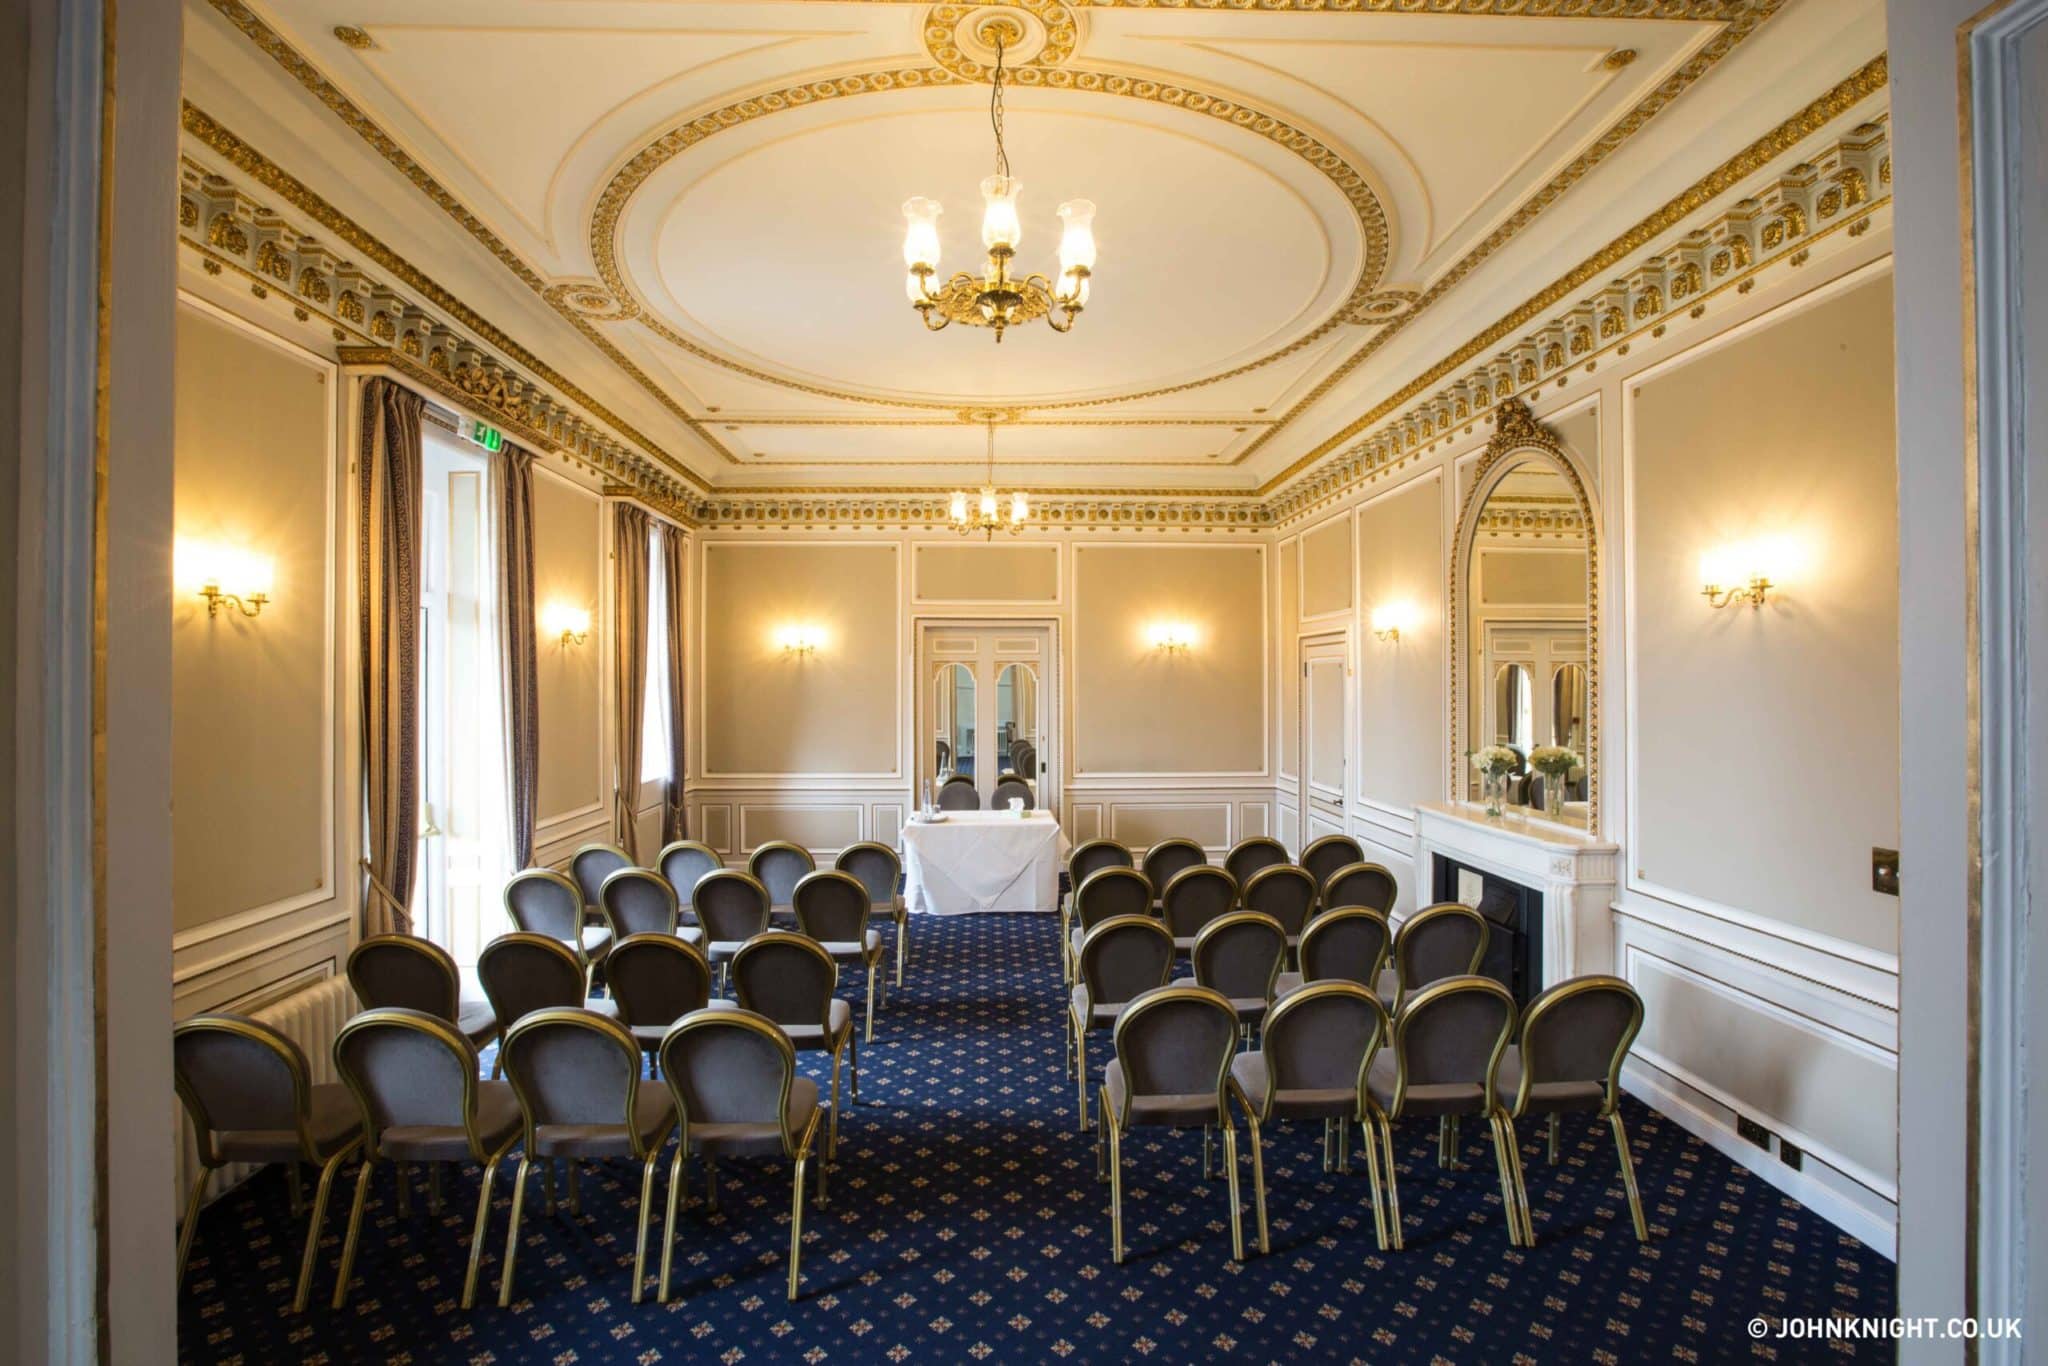 Room with four rows of chairs facing a table with two chairs behind it